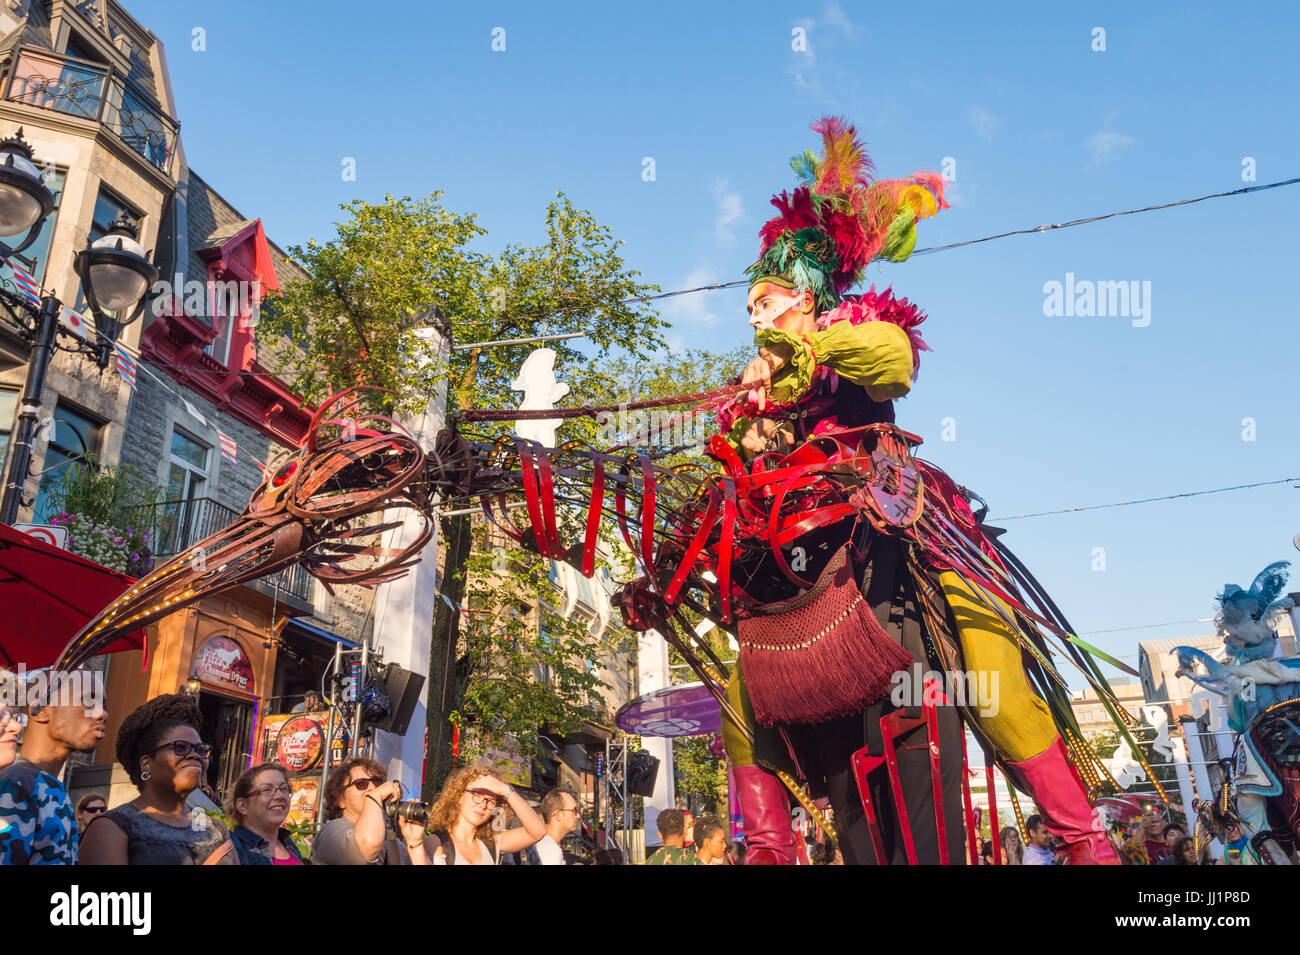 Montreal, Canada - 15 July 2017: 'Les Oiseaux' on Saint Denis Street during Montreal Circus Arts Festival 2017 Stock Photo